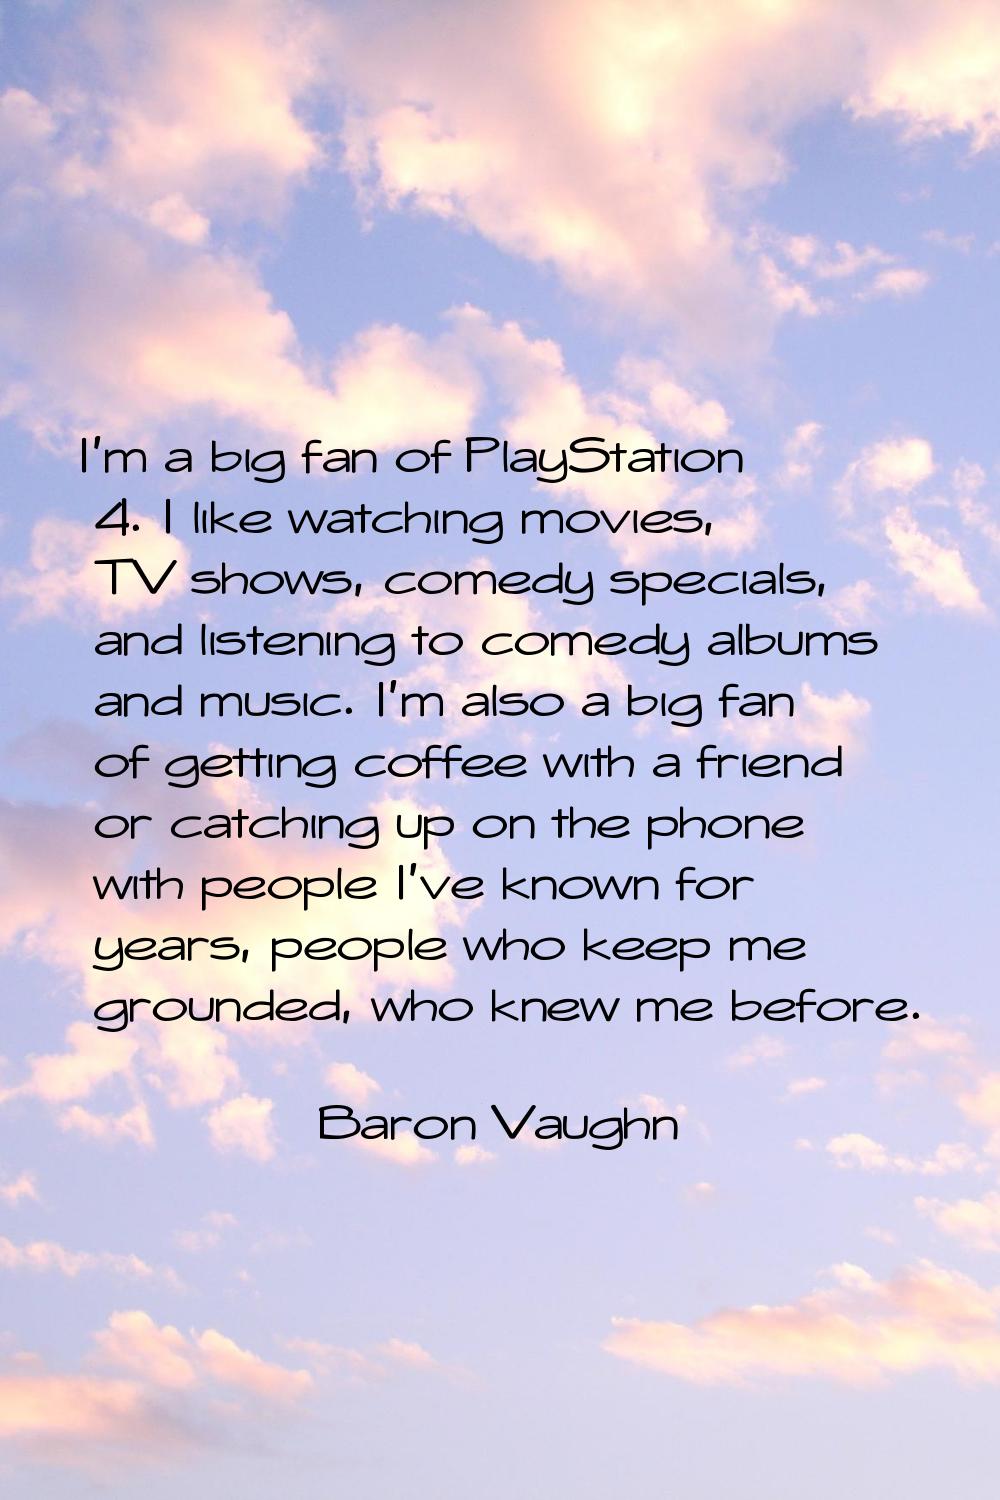 I'm a big fan of PlayStation 4. I like watching movies, TV shows, comedy specials, and listening to